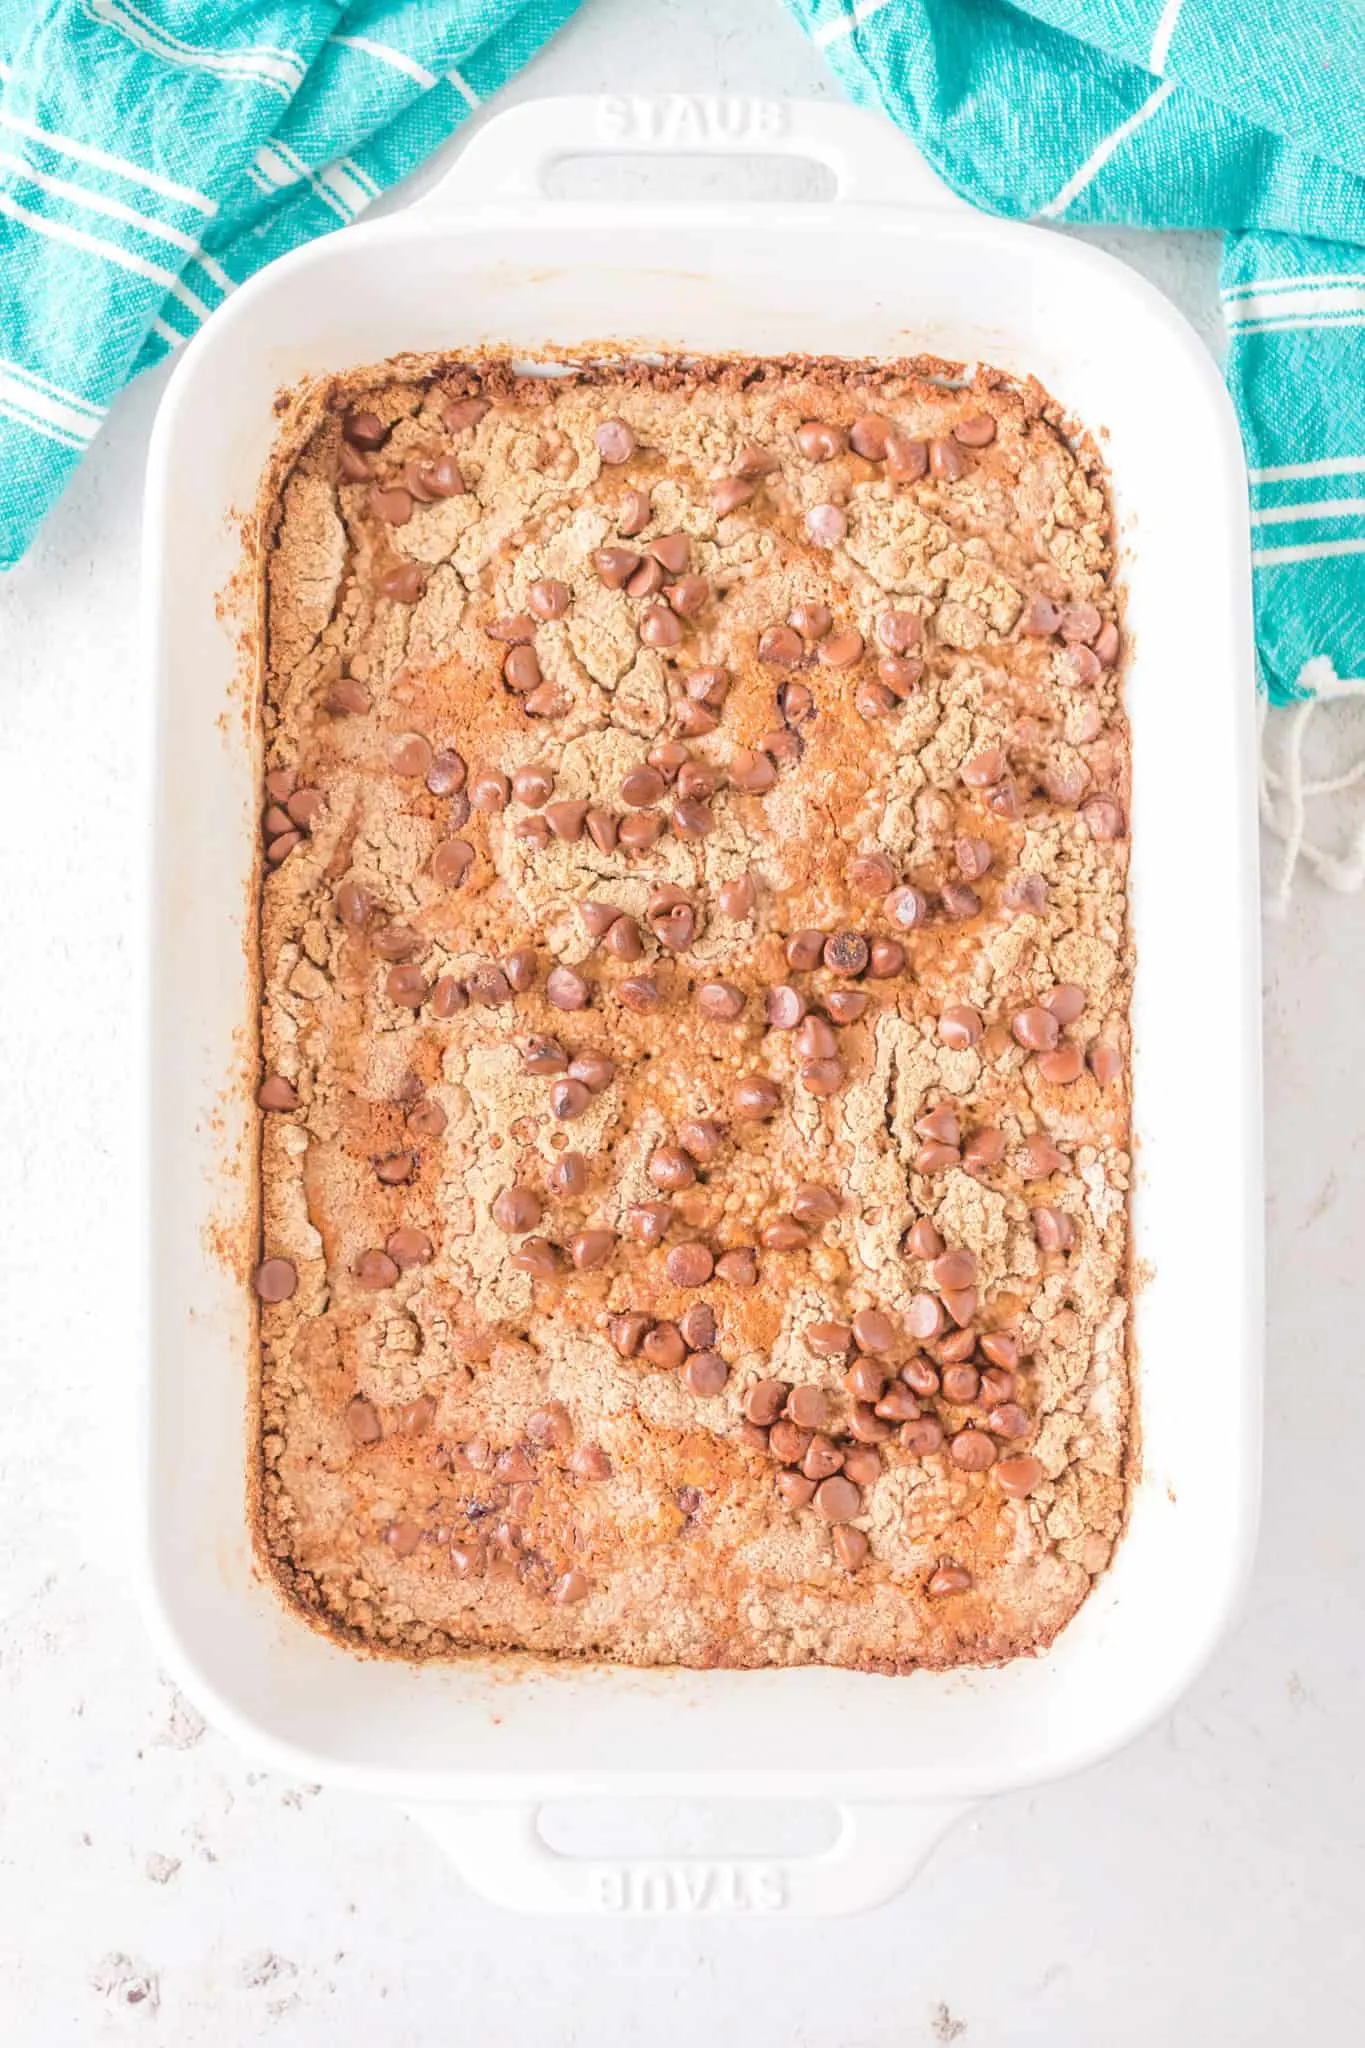 Pumpkin Dump Cake is an easy dessert recipe using canned pumpkin puree, sweetened condensed milk, boxed spice cake mix and milk chocolate chips.